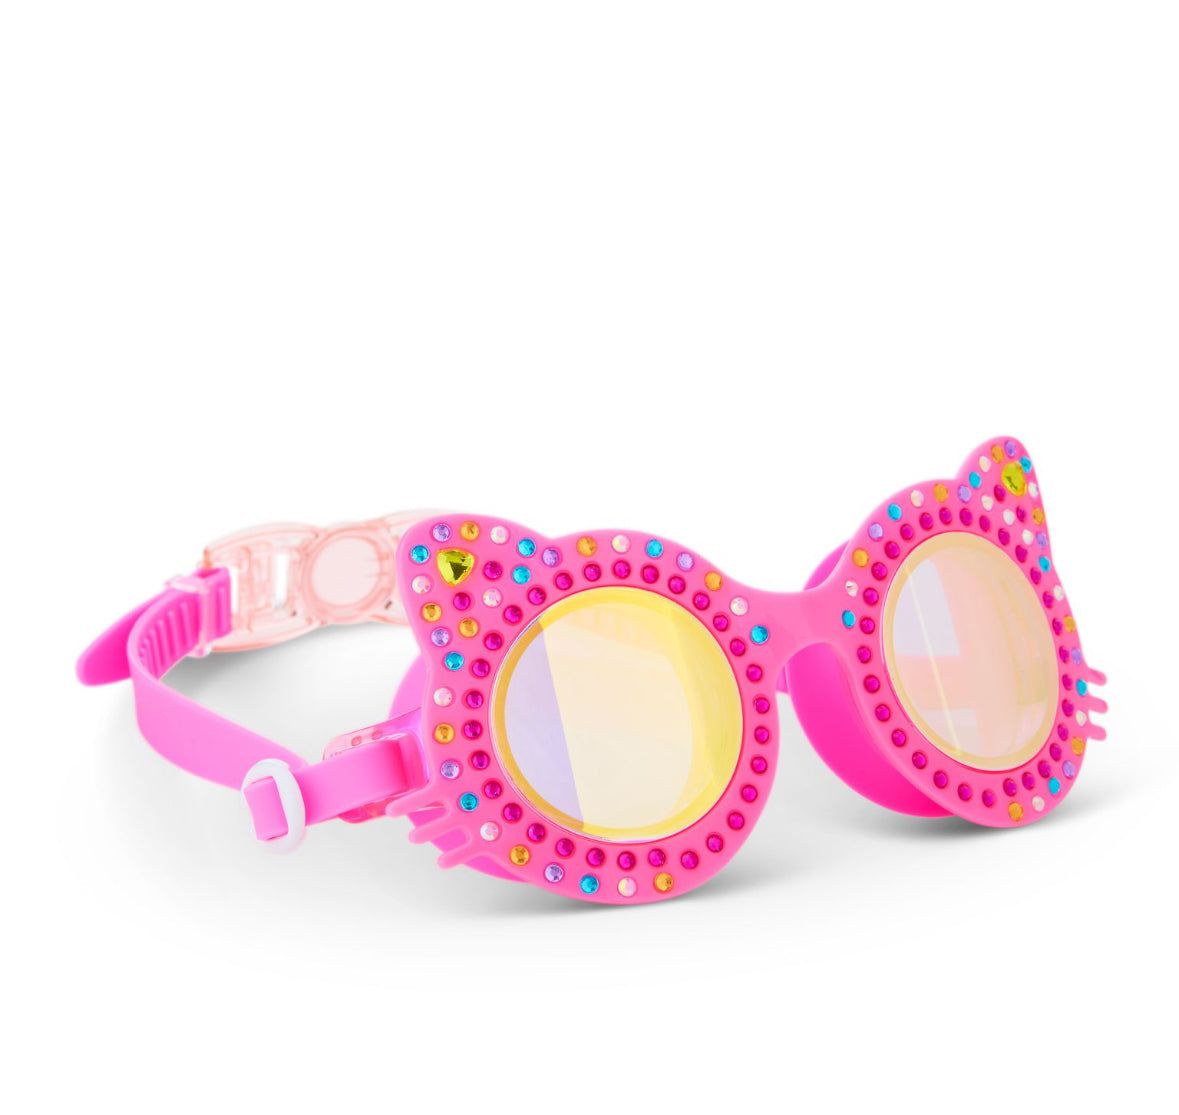 Bling2o Mango Mittens Goggles